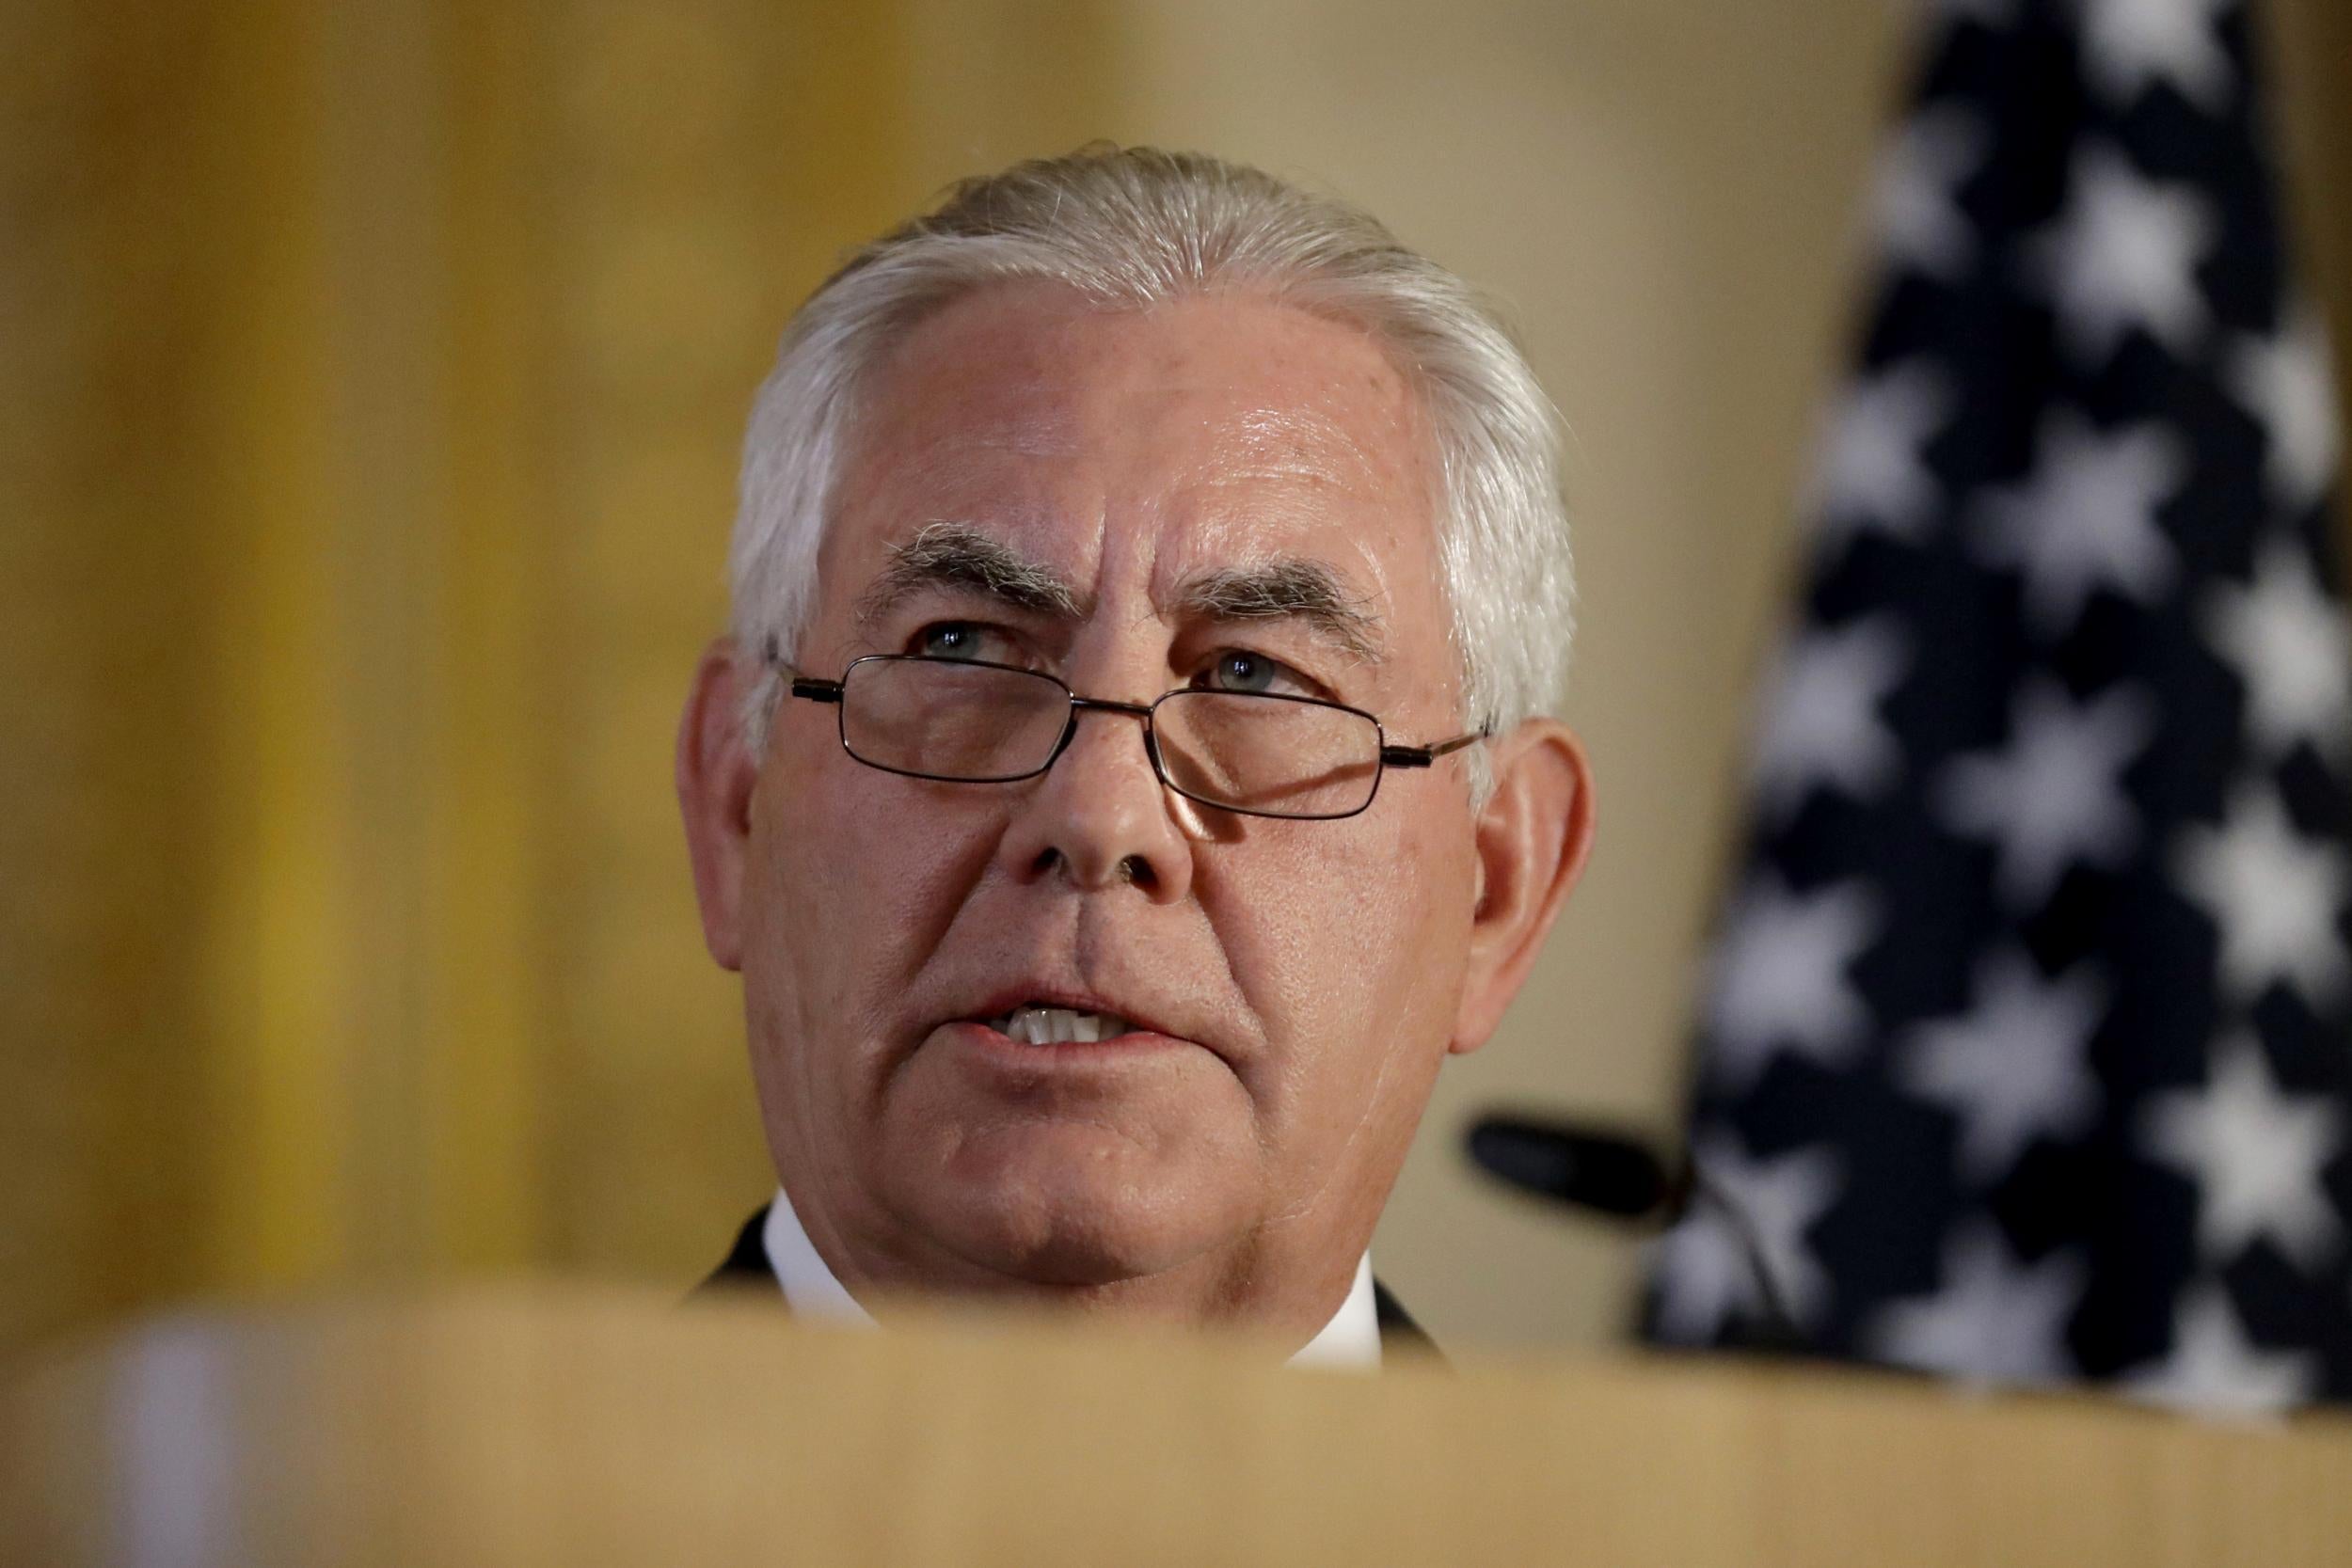 US Secretary of State Rex Tillerson suggested America could remain in the Paris climate accord